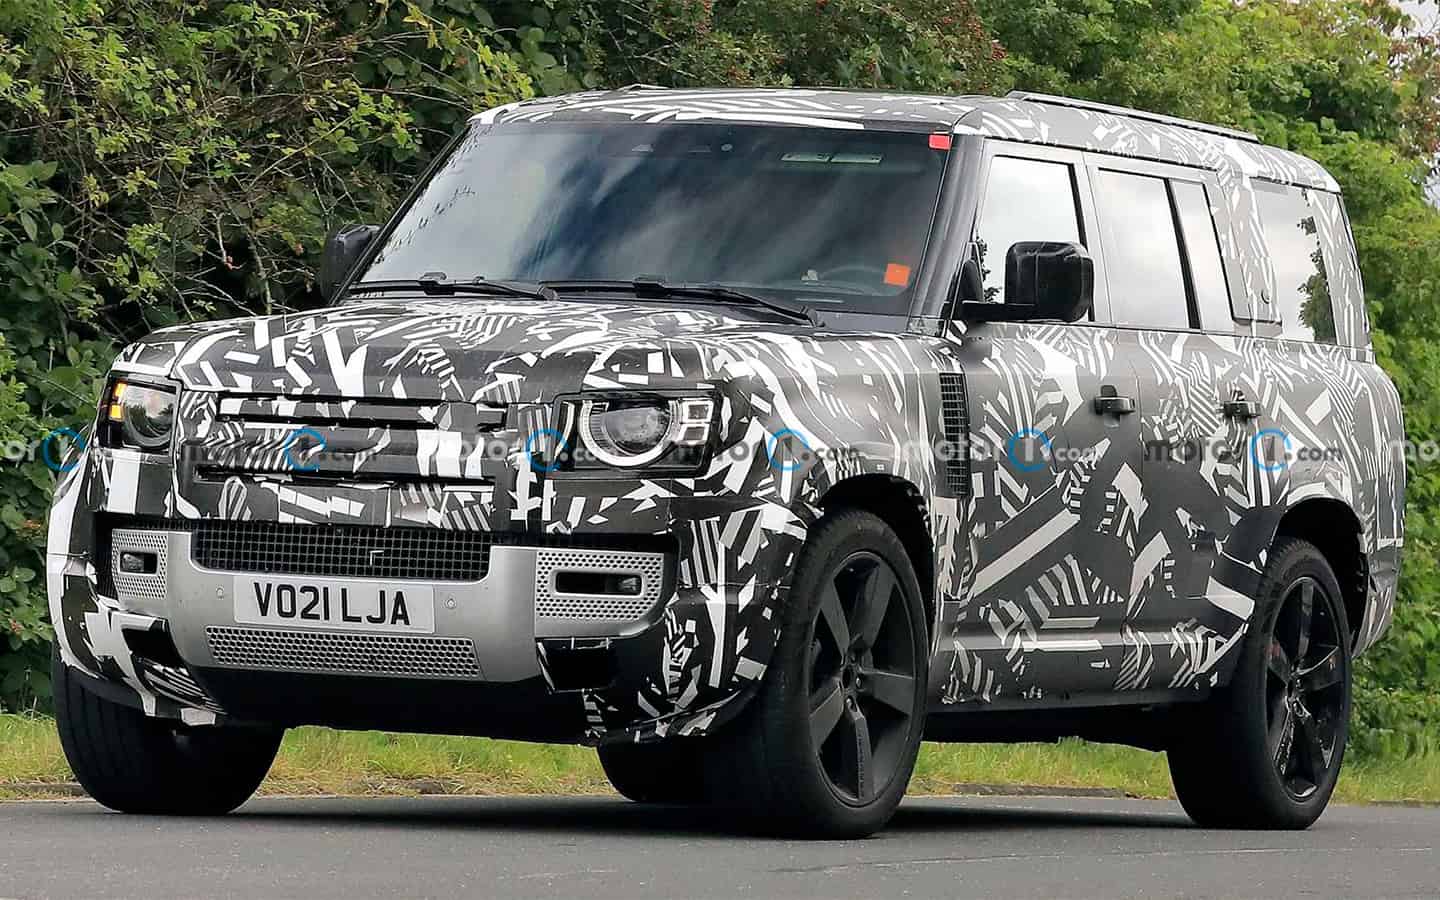 Land Rover Defender with three rows of seats first seen in tests